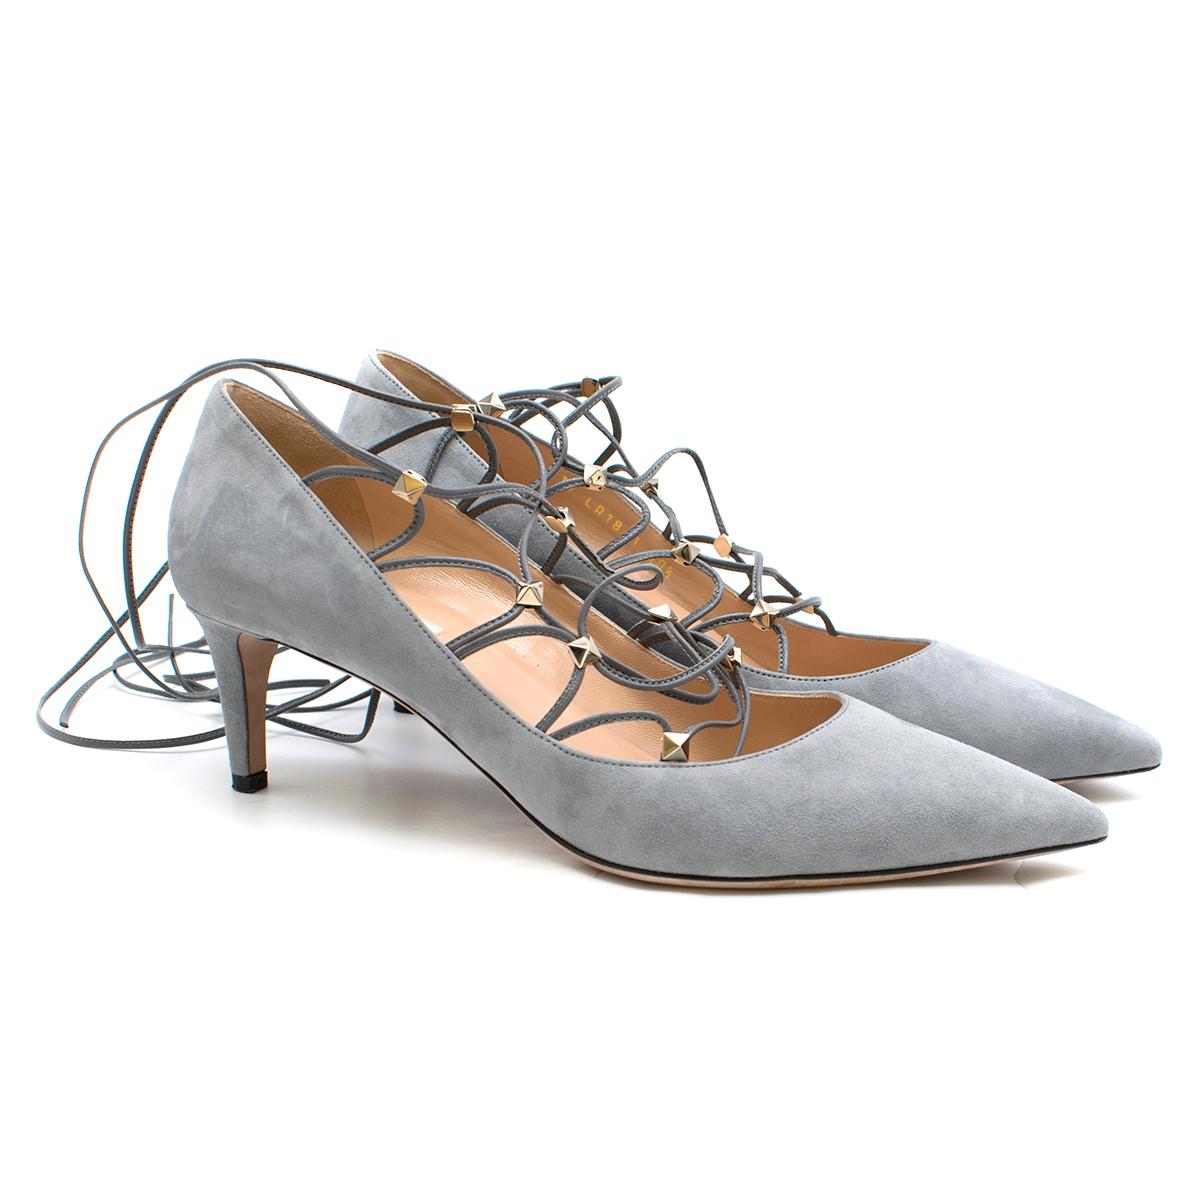 Valentino Garavani Grey Rockstud Suede Lace-up Pumps 

- Grey Pump Heels 
- Suede covered outer
- Point toe, slim toeline
- Leather lace-up with stud detailing and ankle strap fastening 
- Leather covered stiletto heel 
 -Beige leather insole and